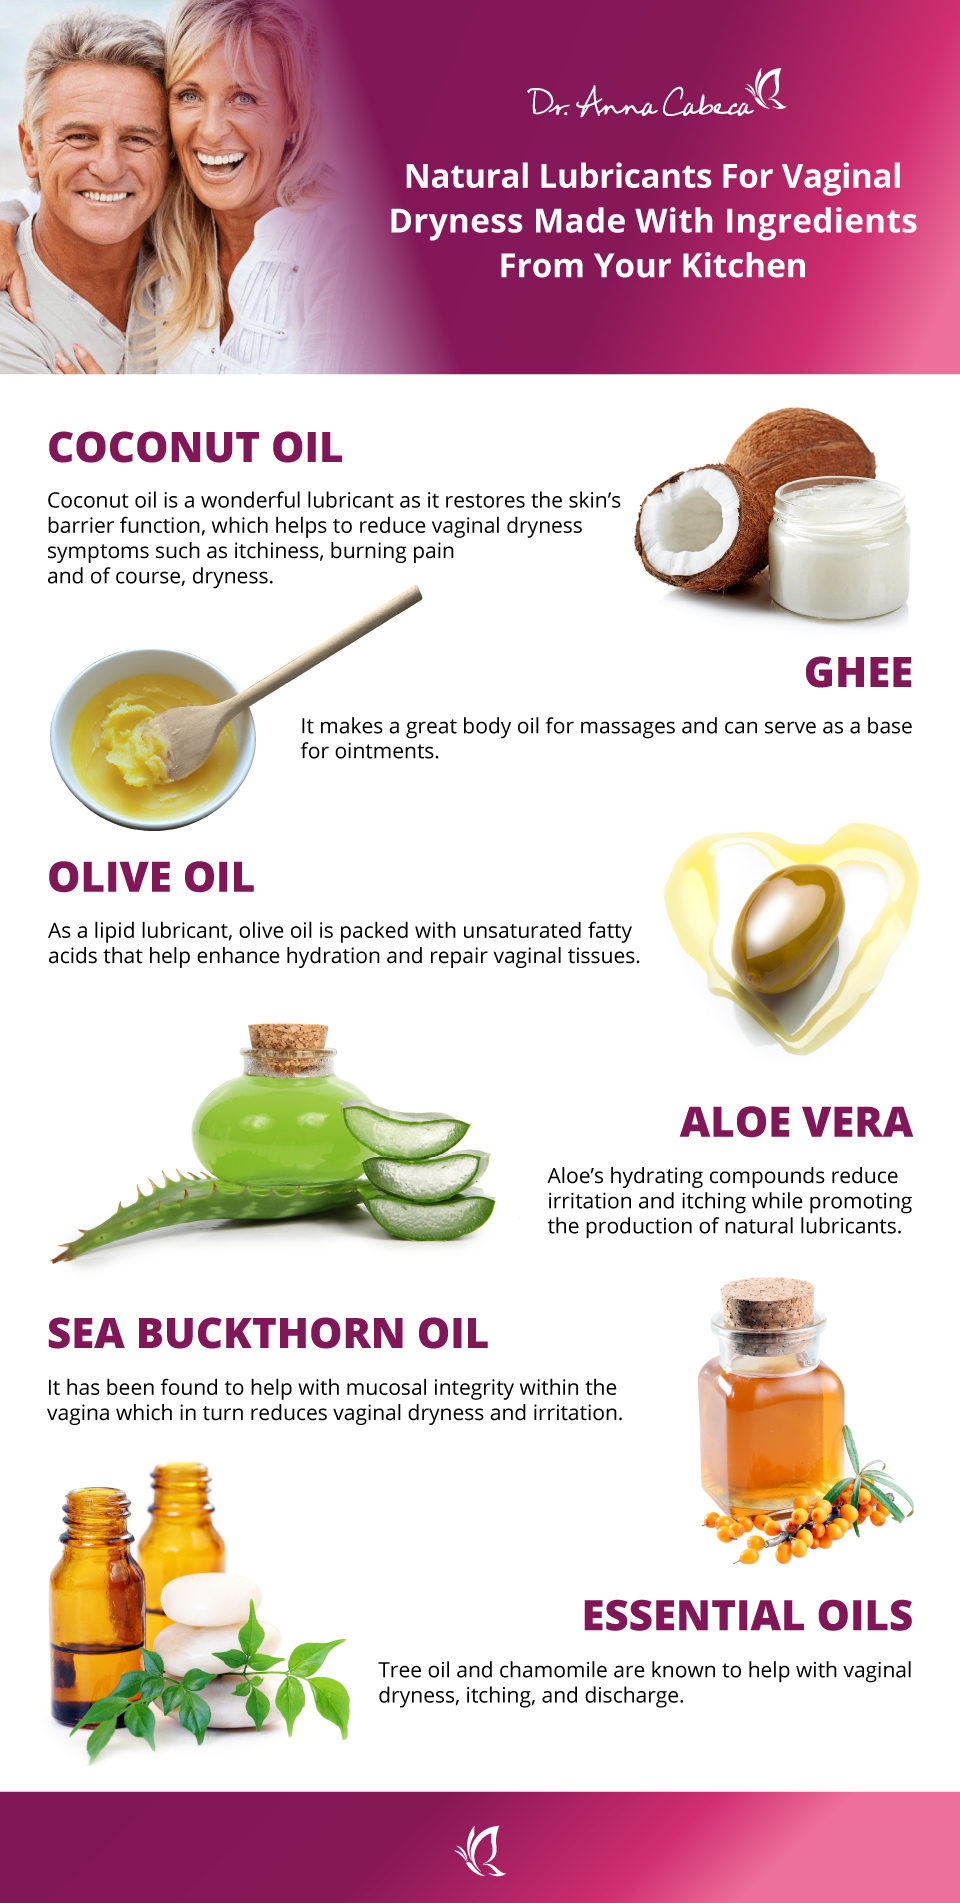  DIY natural lubricants from ingredients in your kitchen